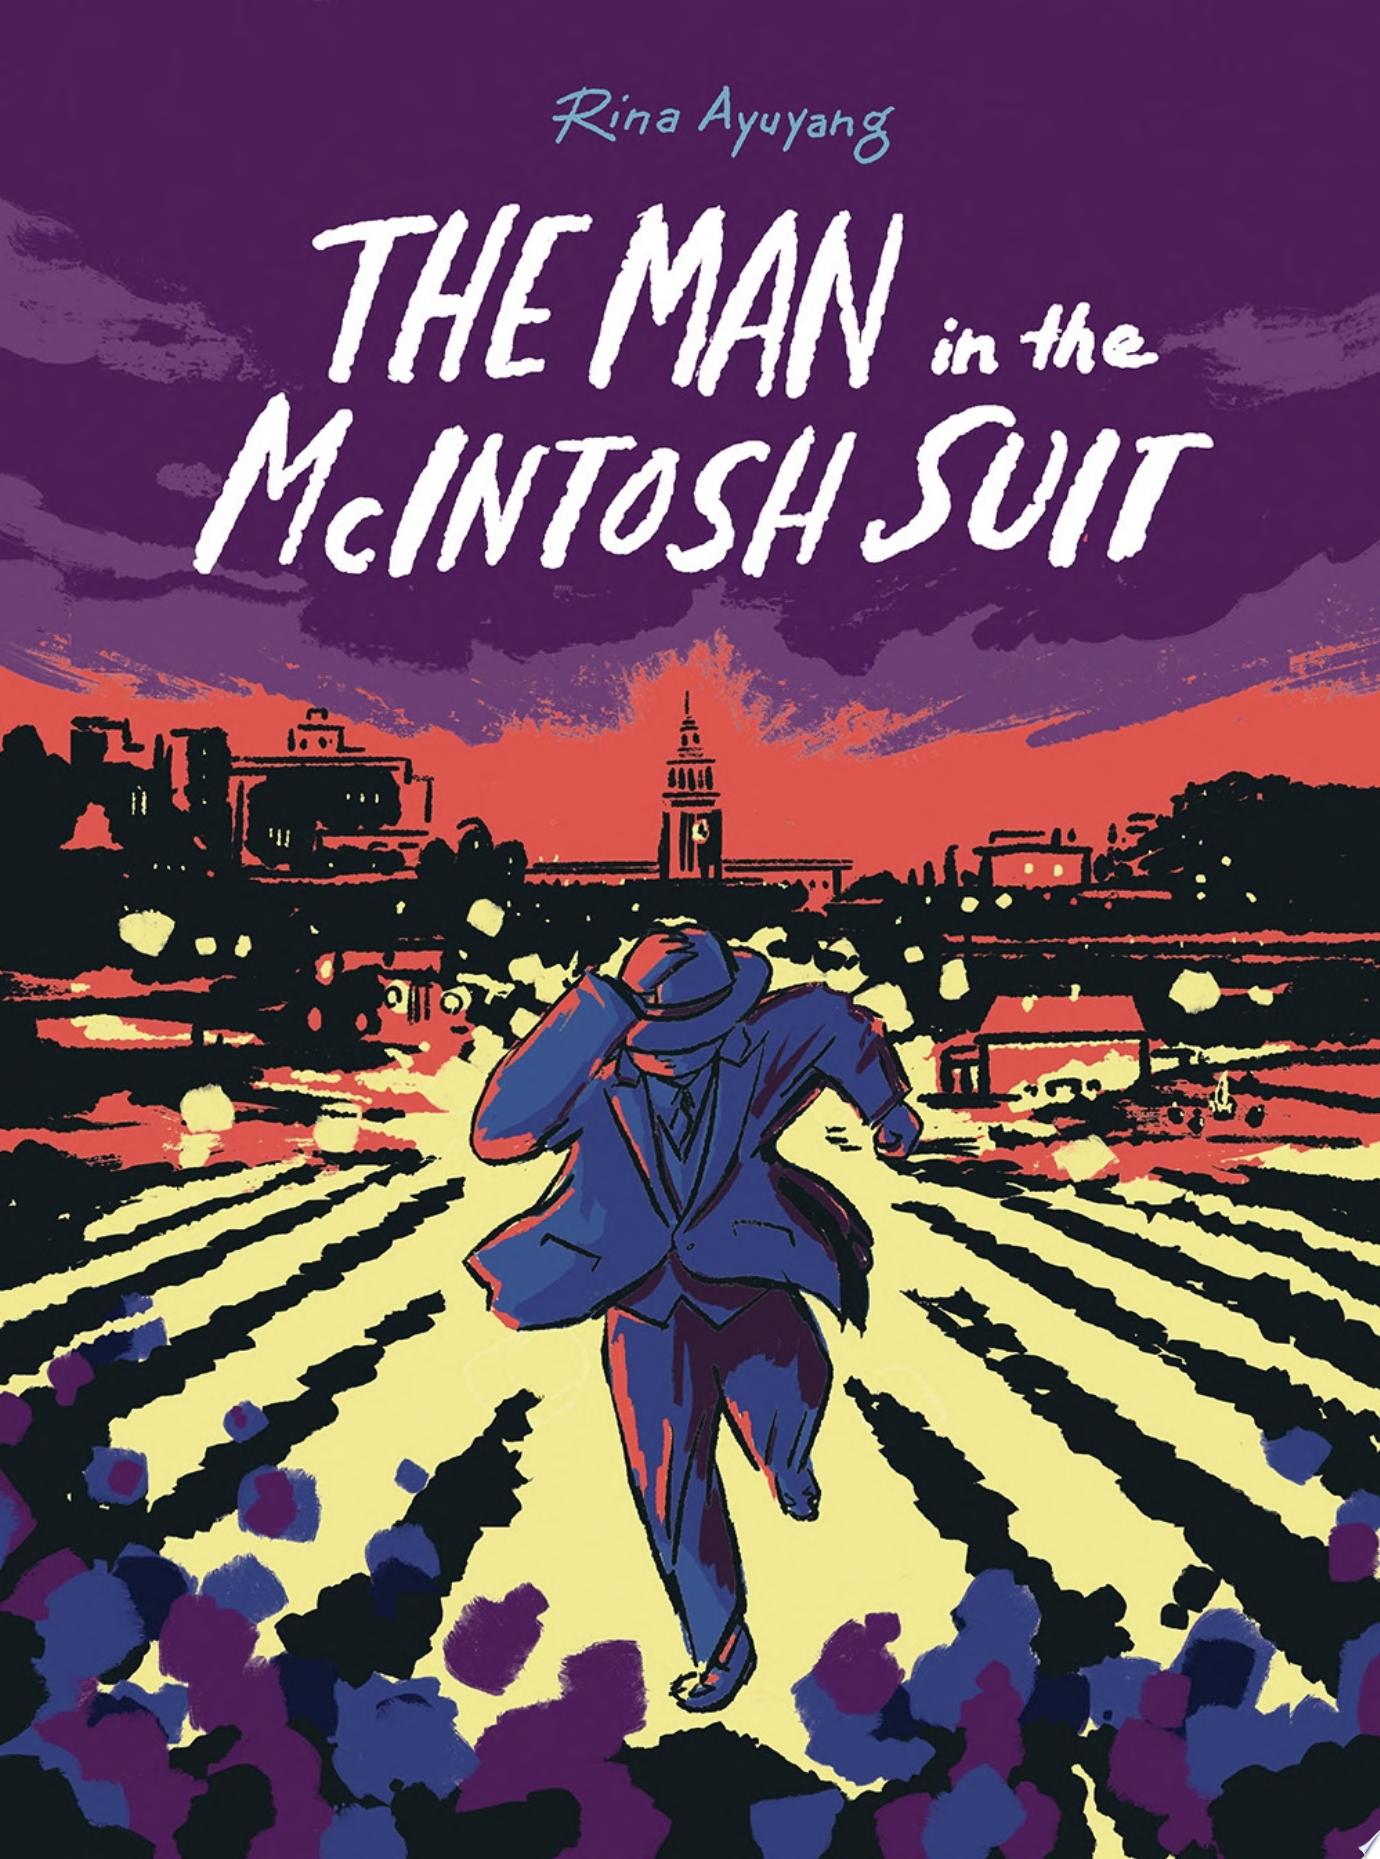 Image for "The Man in the McIntosh Suit"